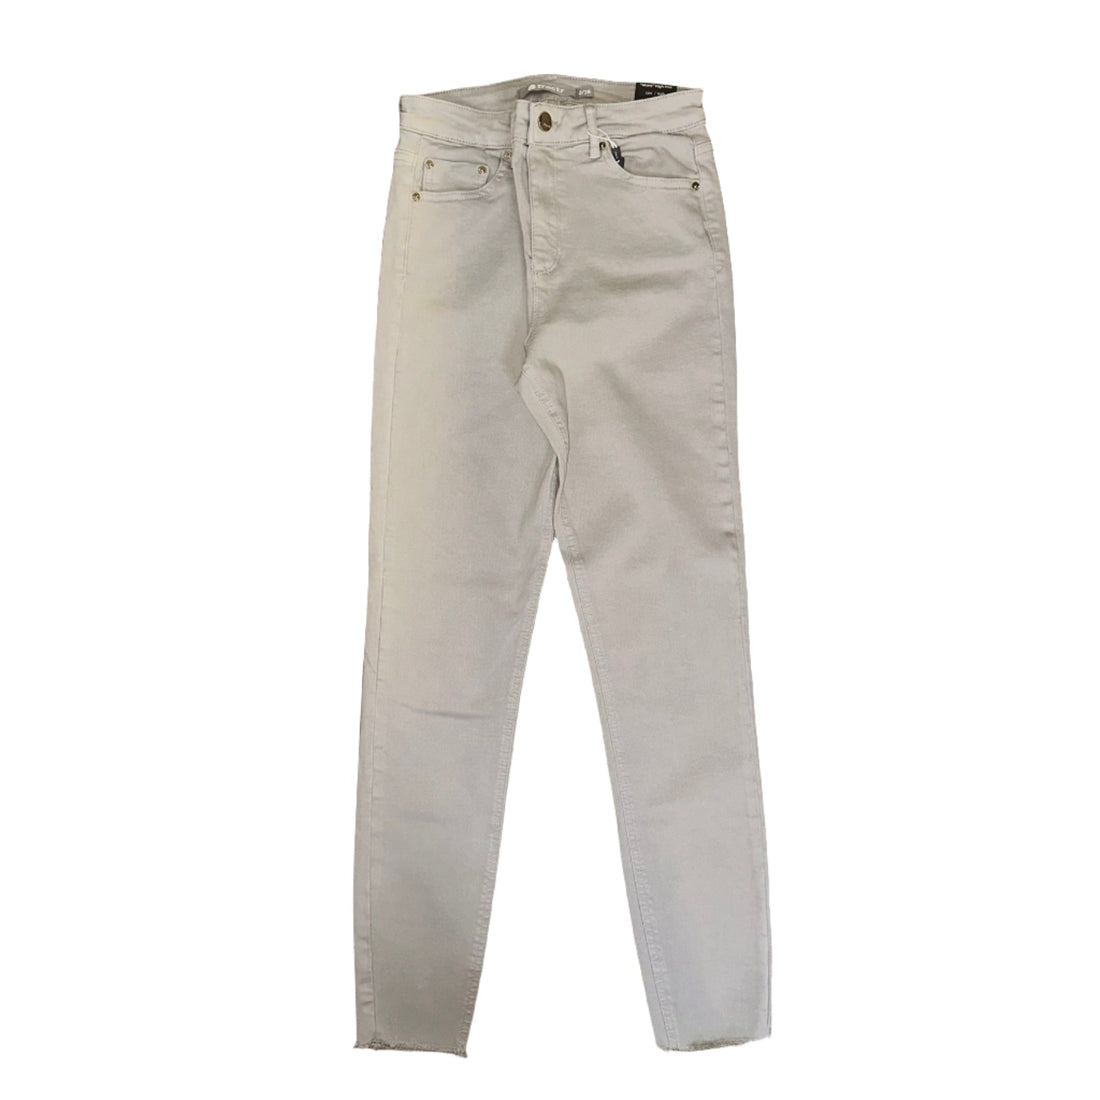 Tractr Jeans Mona- High Rise- Dove